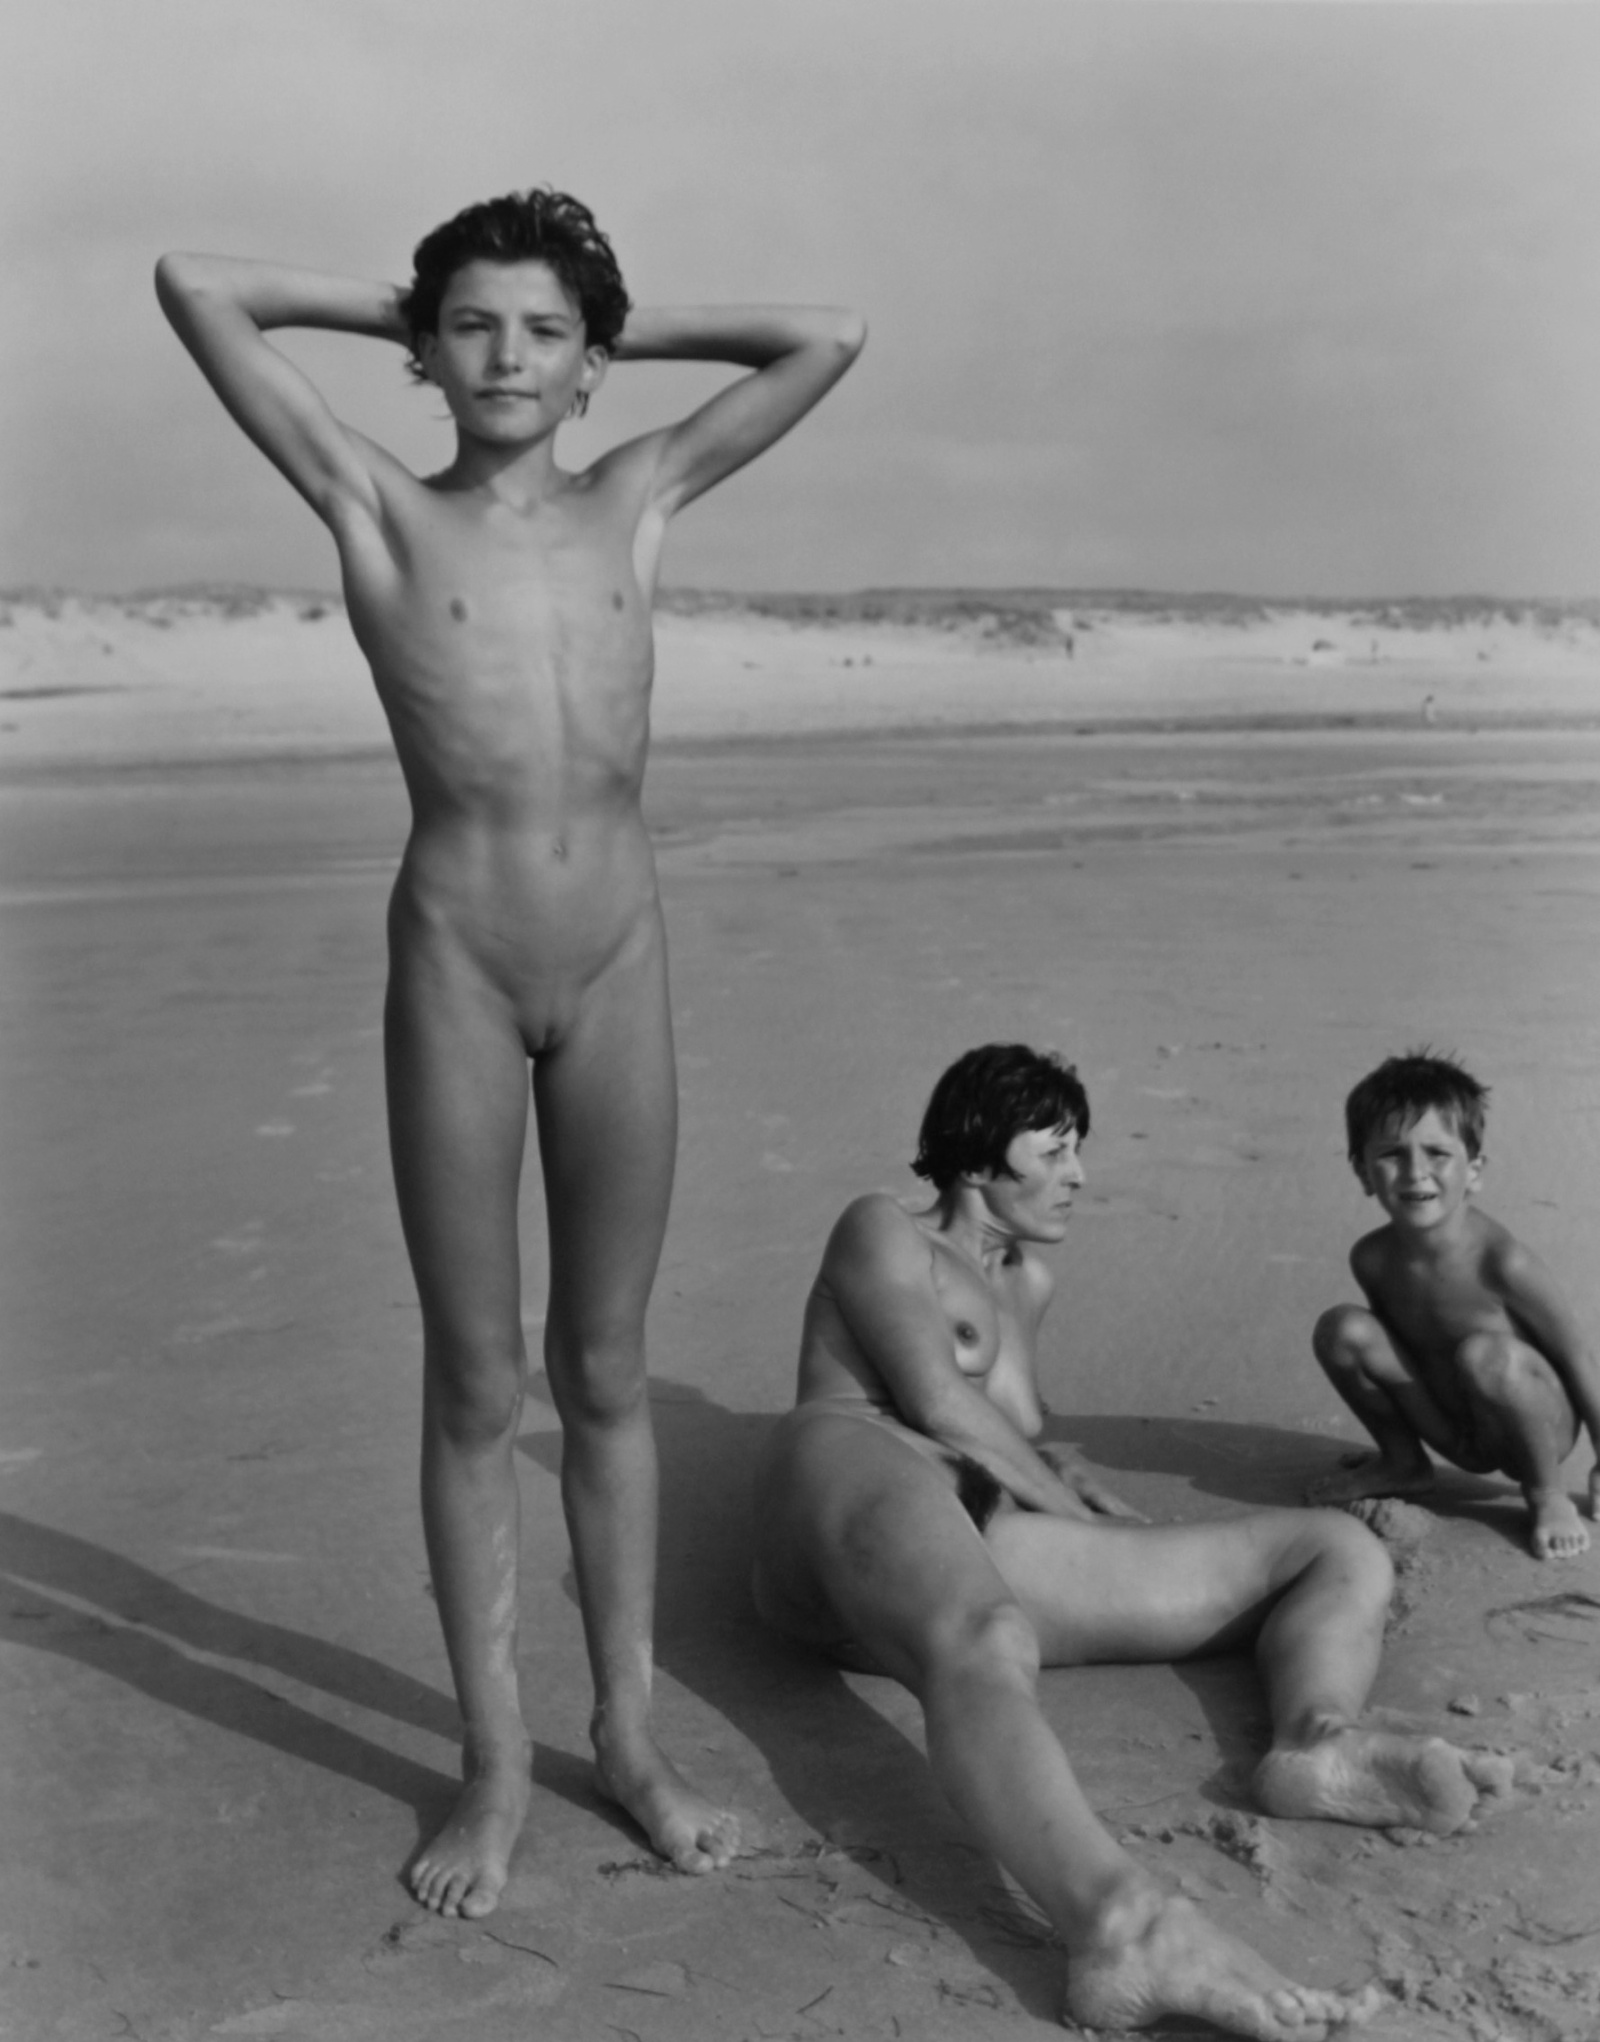 Jock Sturges, Marine, 1987
Gelatin silver print
45 x 36 cm
Edition 6/40
Signed, titled, dated with pencil, verso 